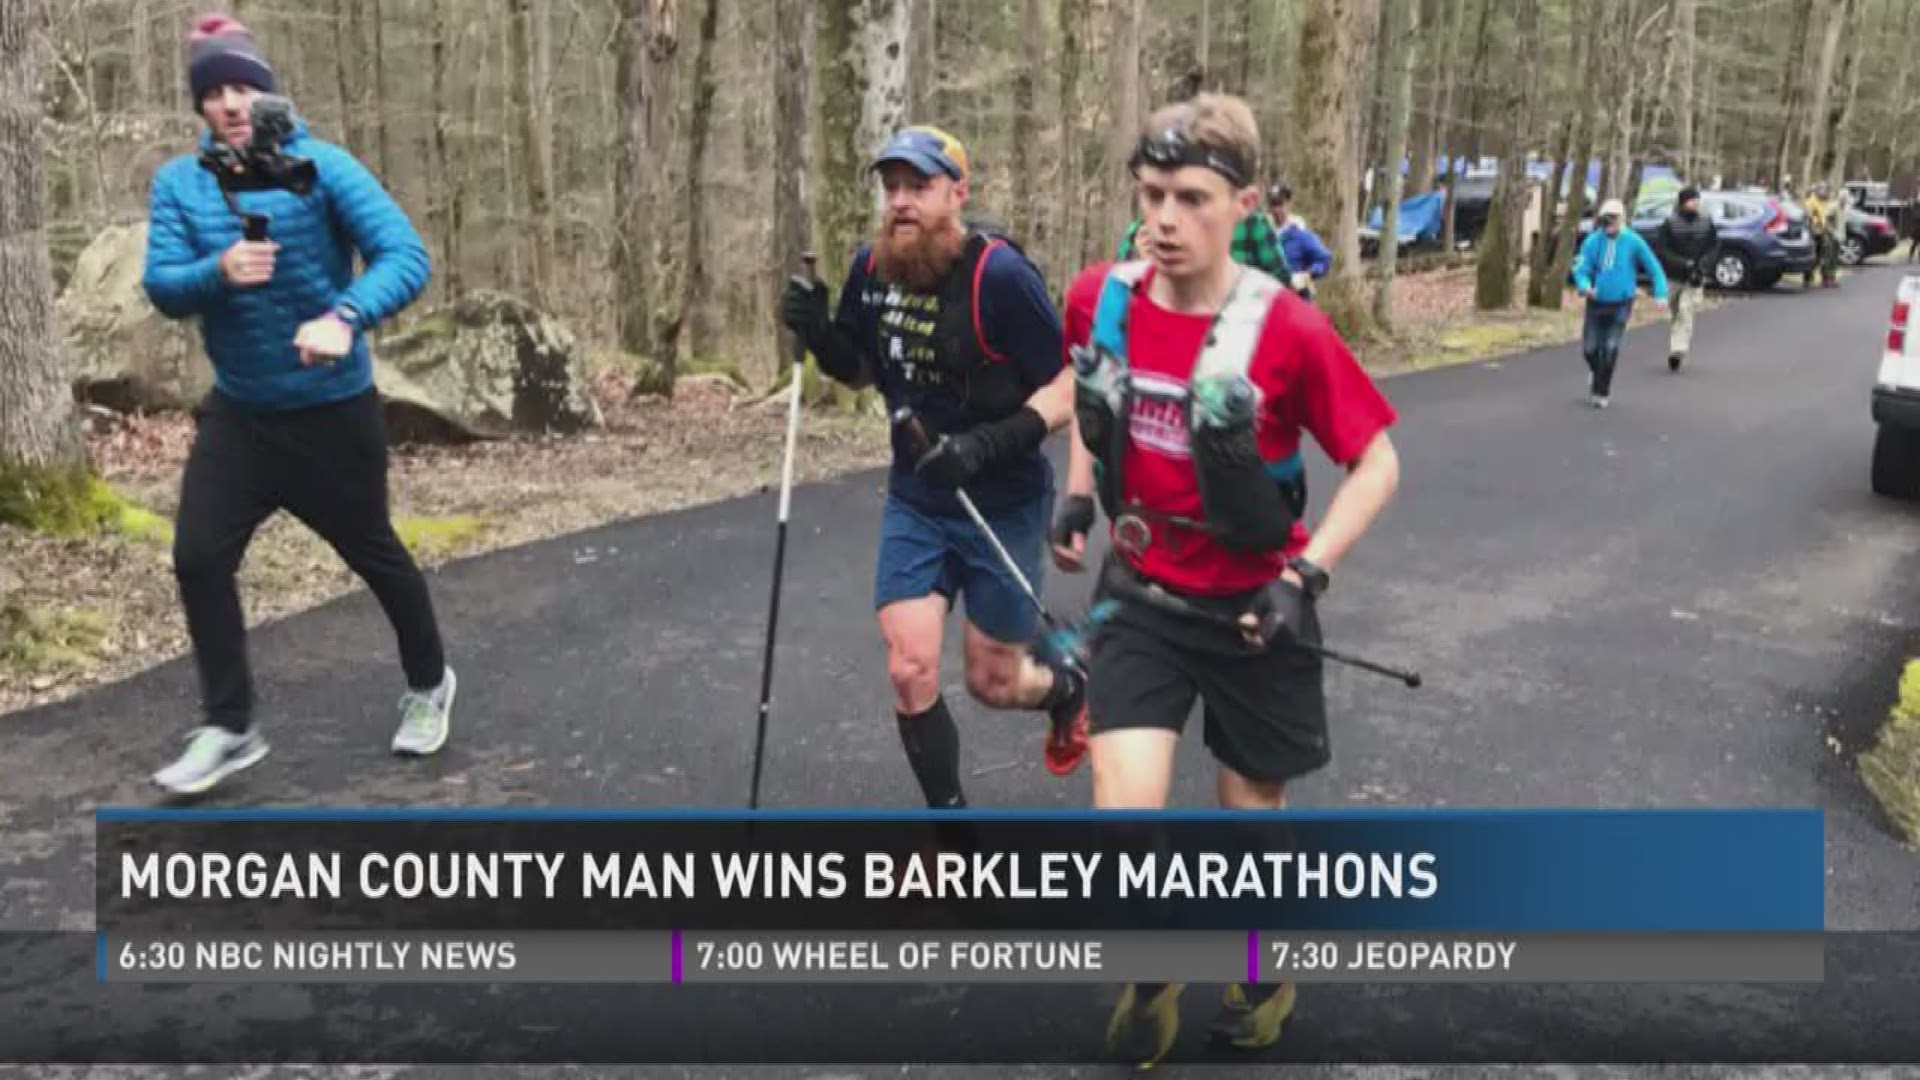 April 4, 2017: An East Tennessee native has become only the 15th person ever to finish the 100-mile Barkley Marathons.